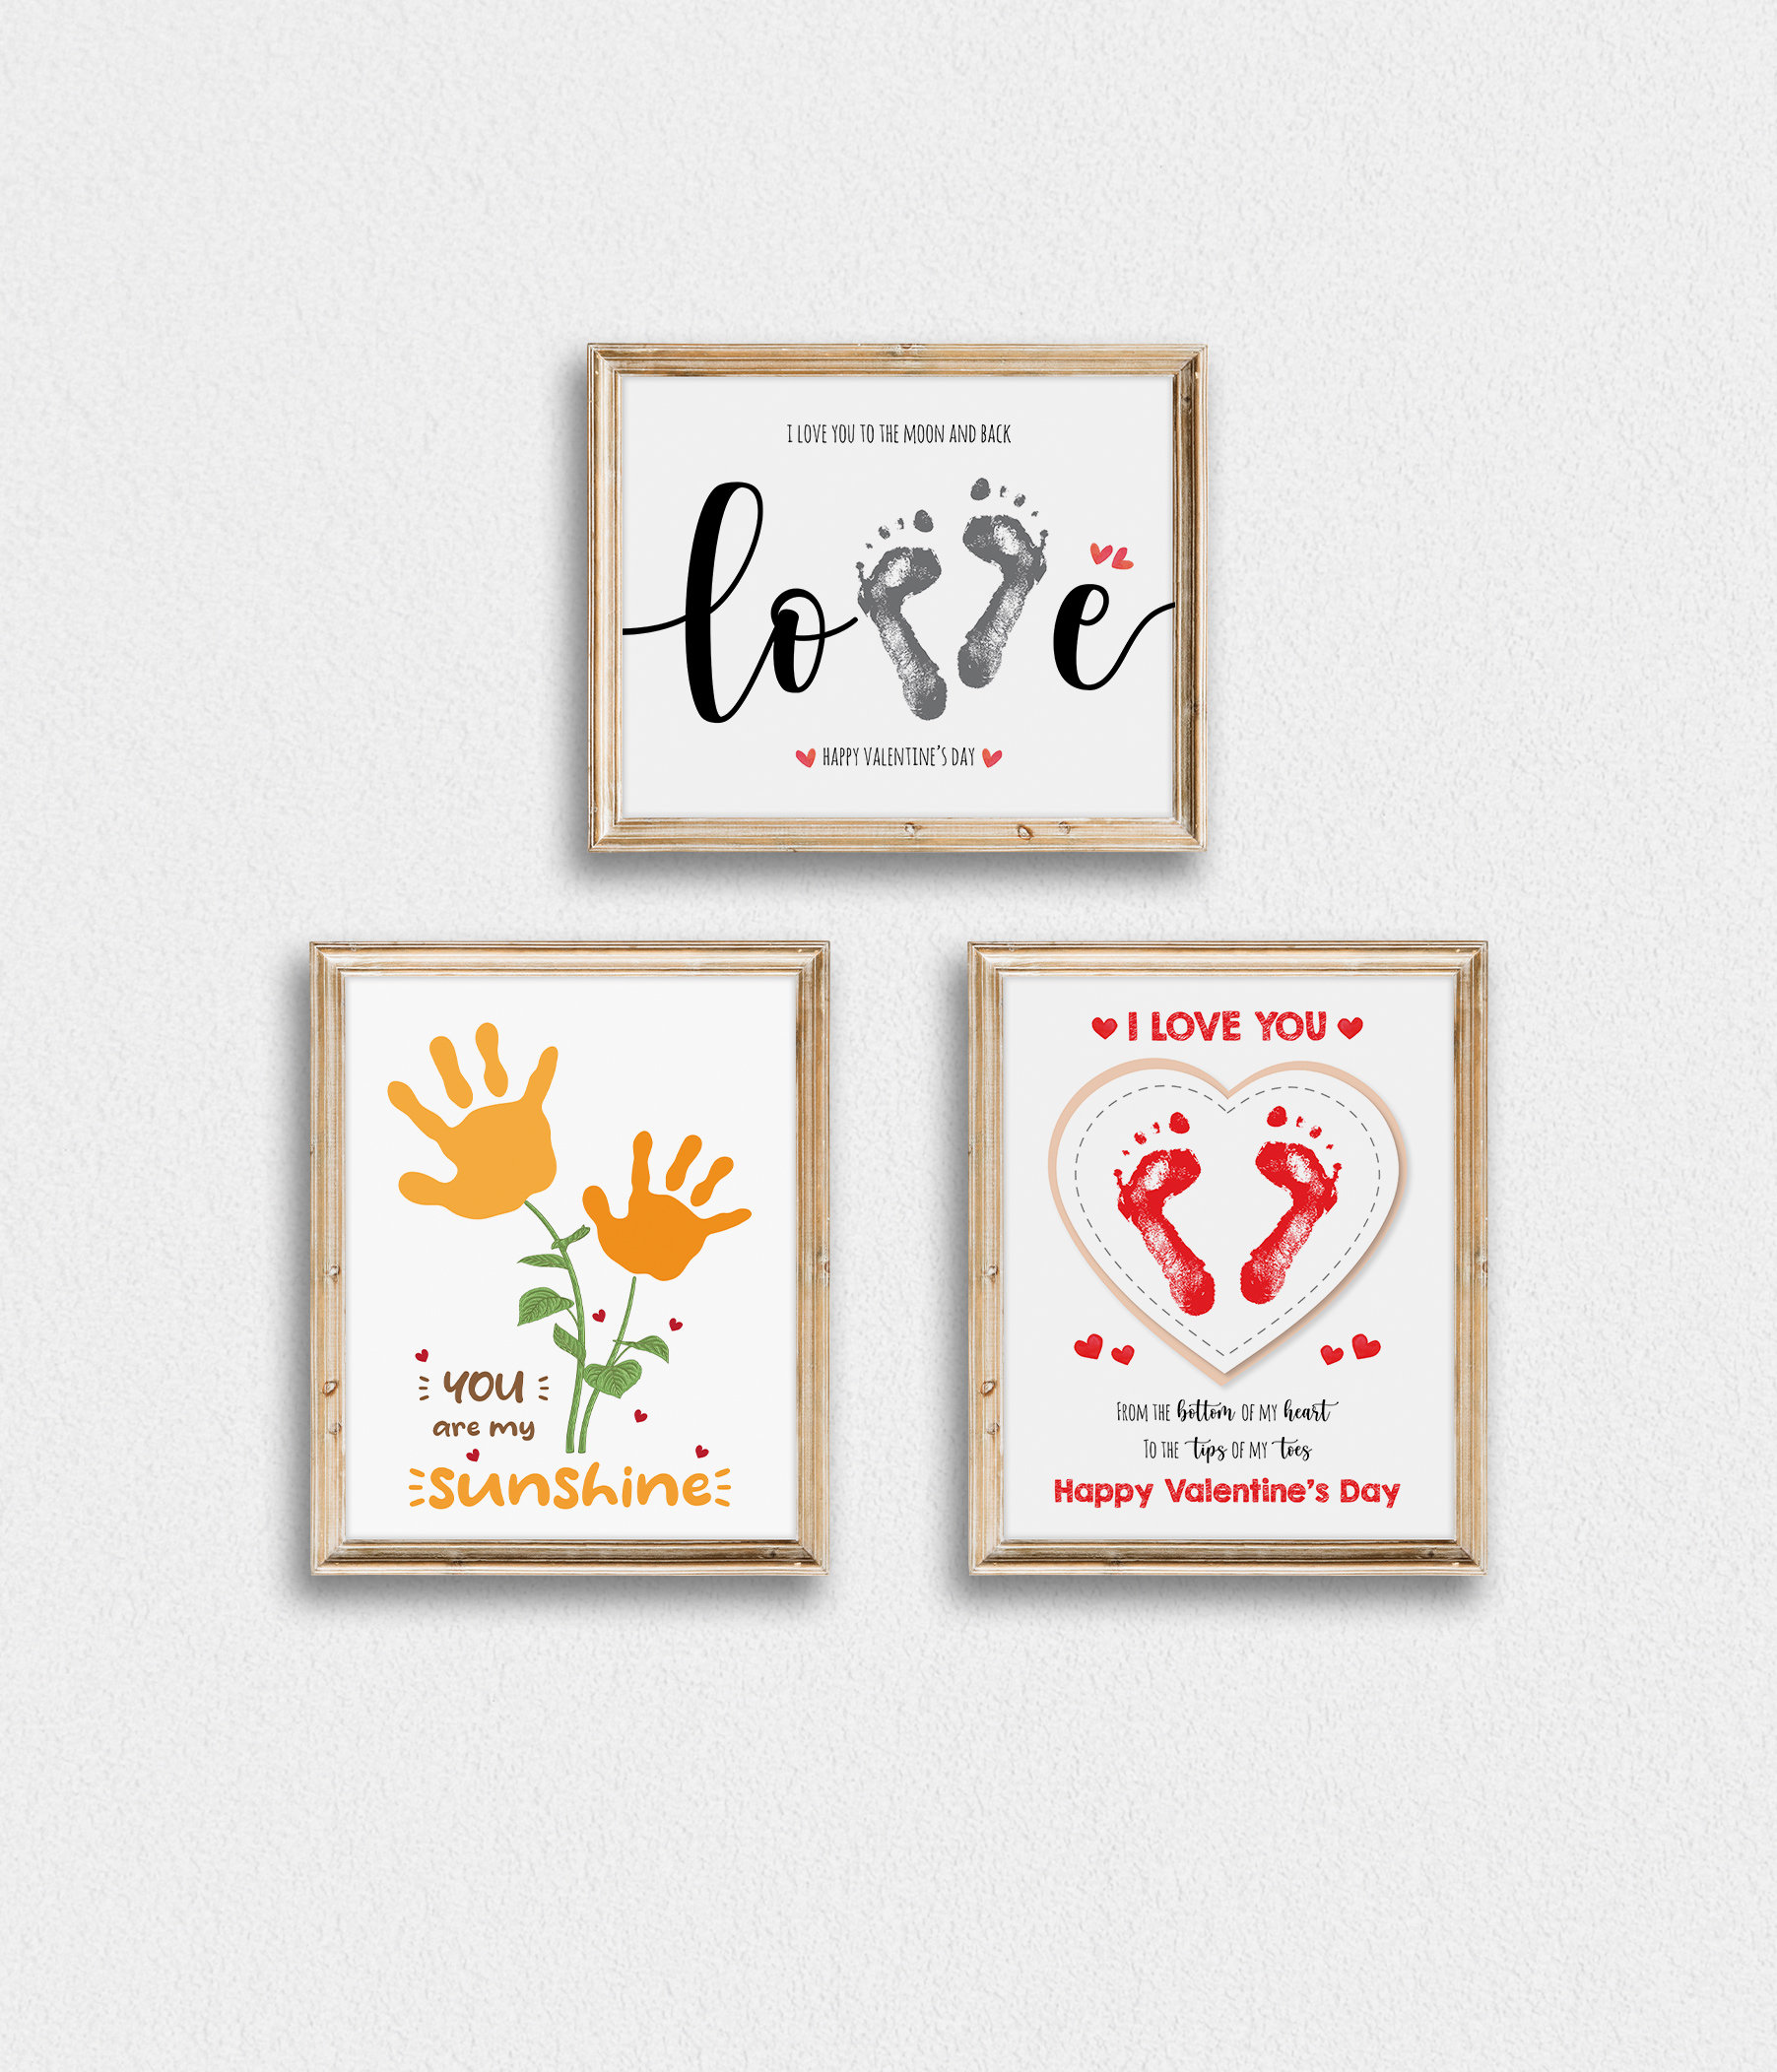 LOVE Baby Handprint & Footprint Kit – Printables by The Craft-at-Home Family